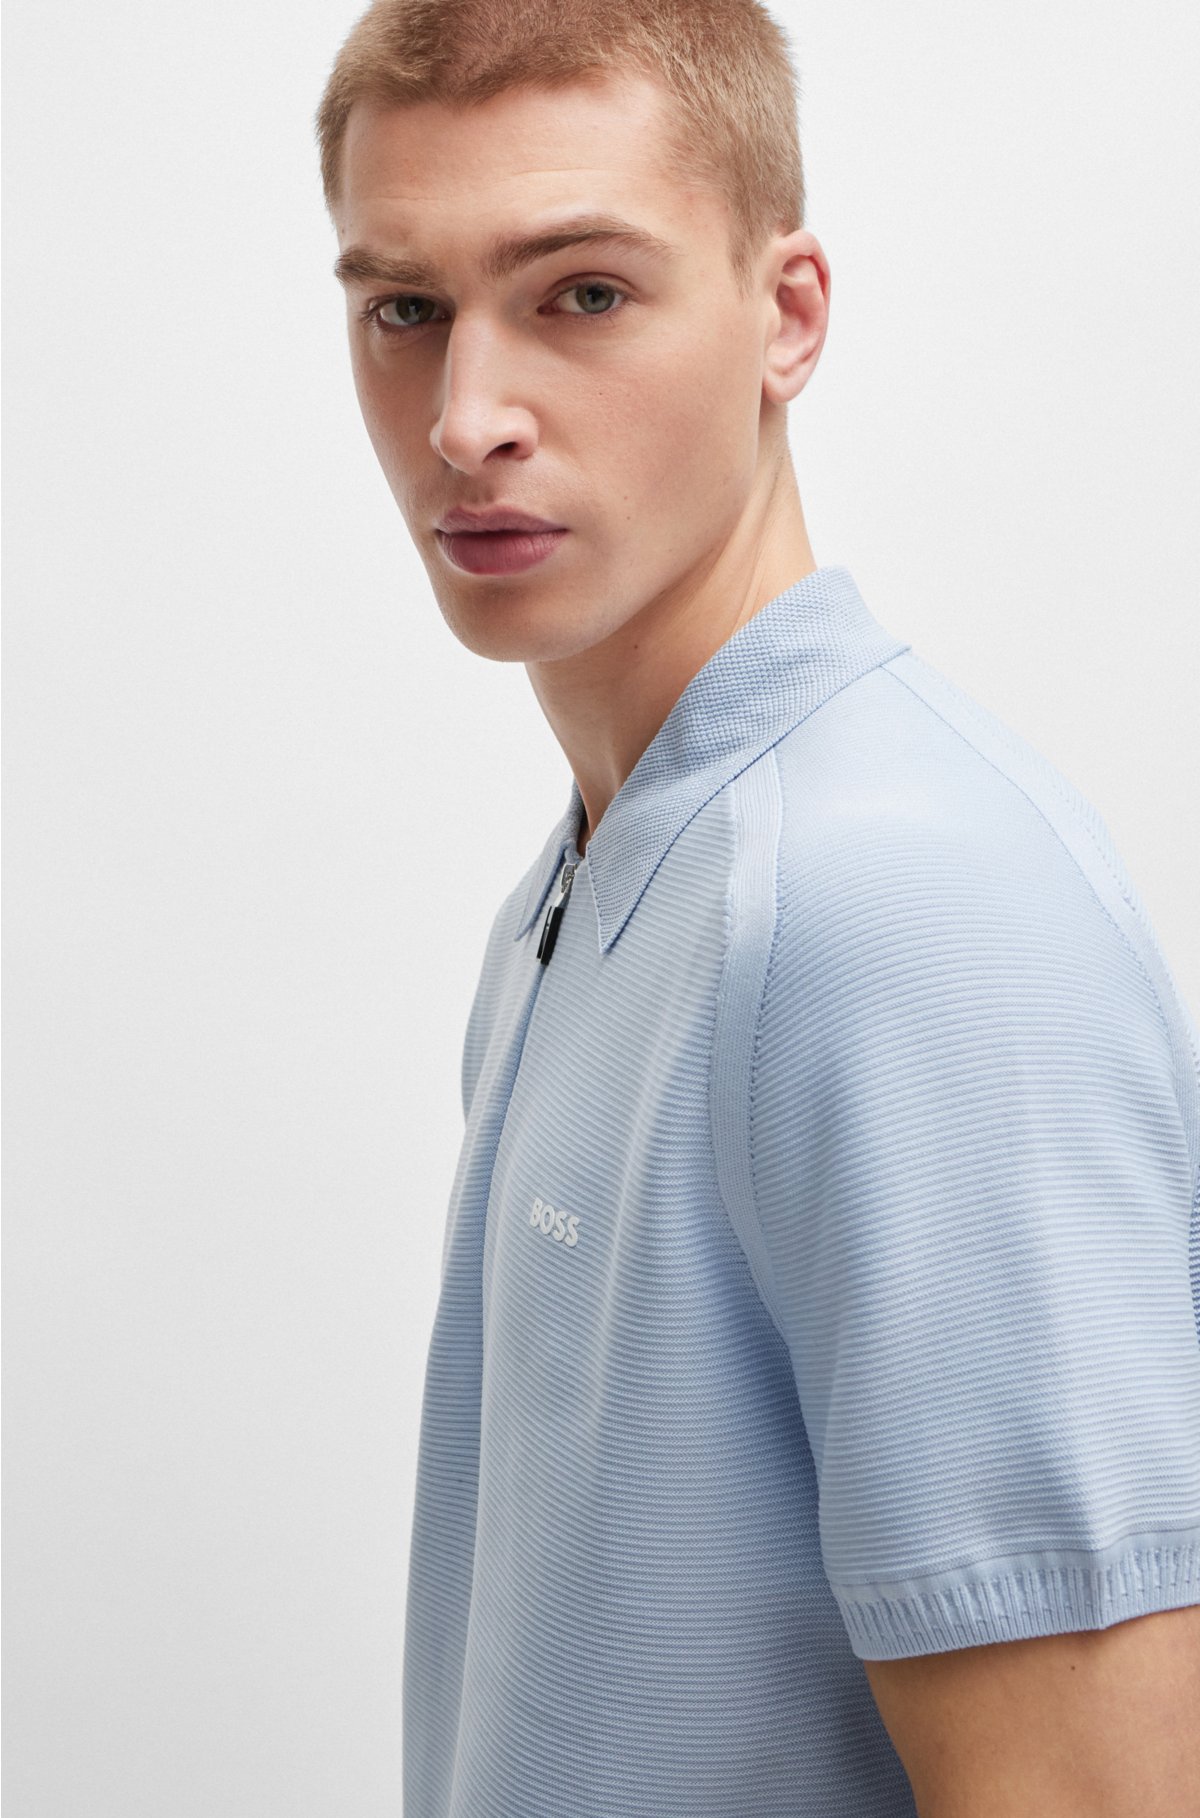 Short-sleeved zip-neck polo sweater with logo detail, Light Blue